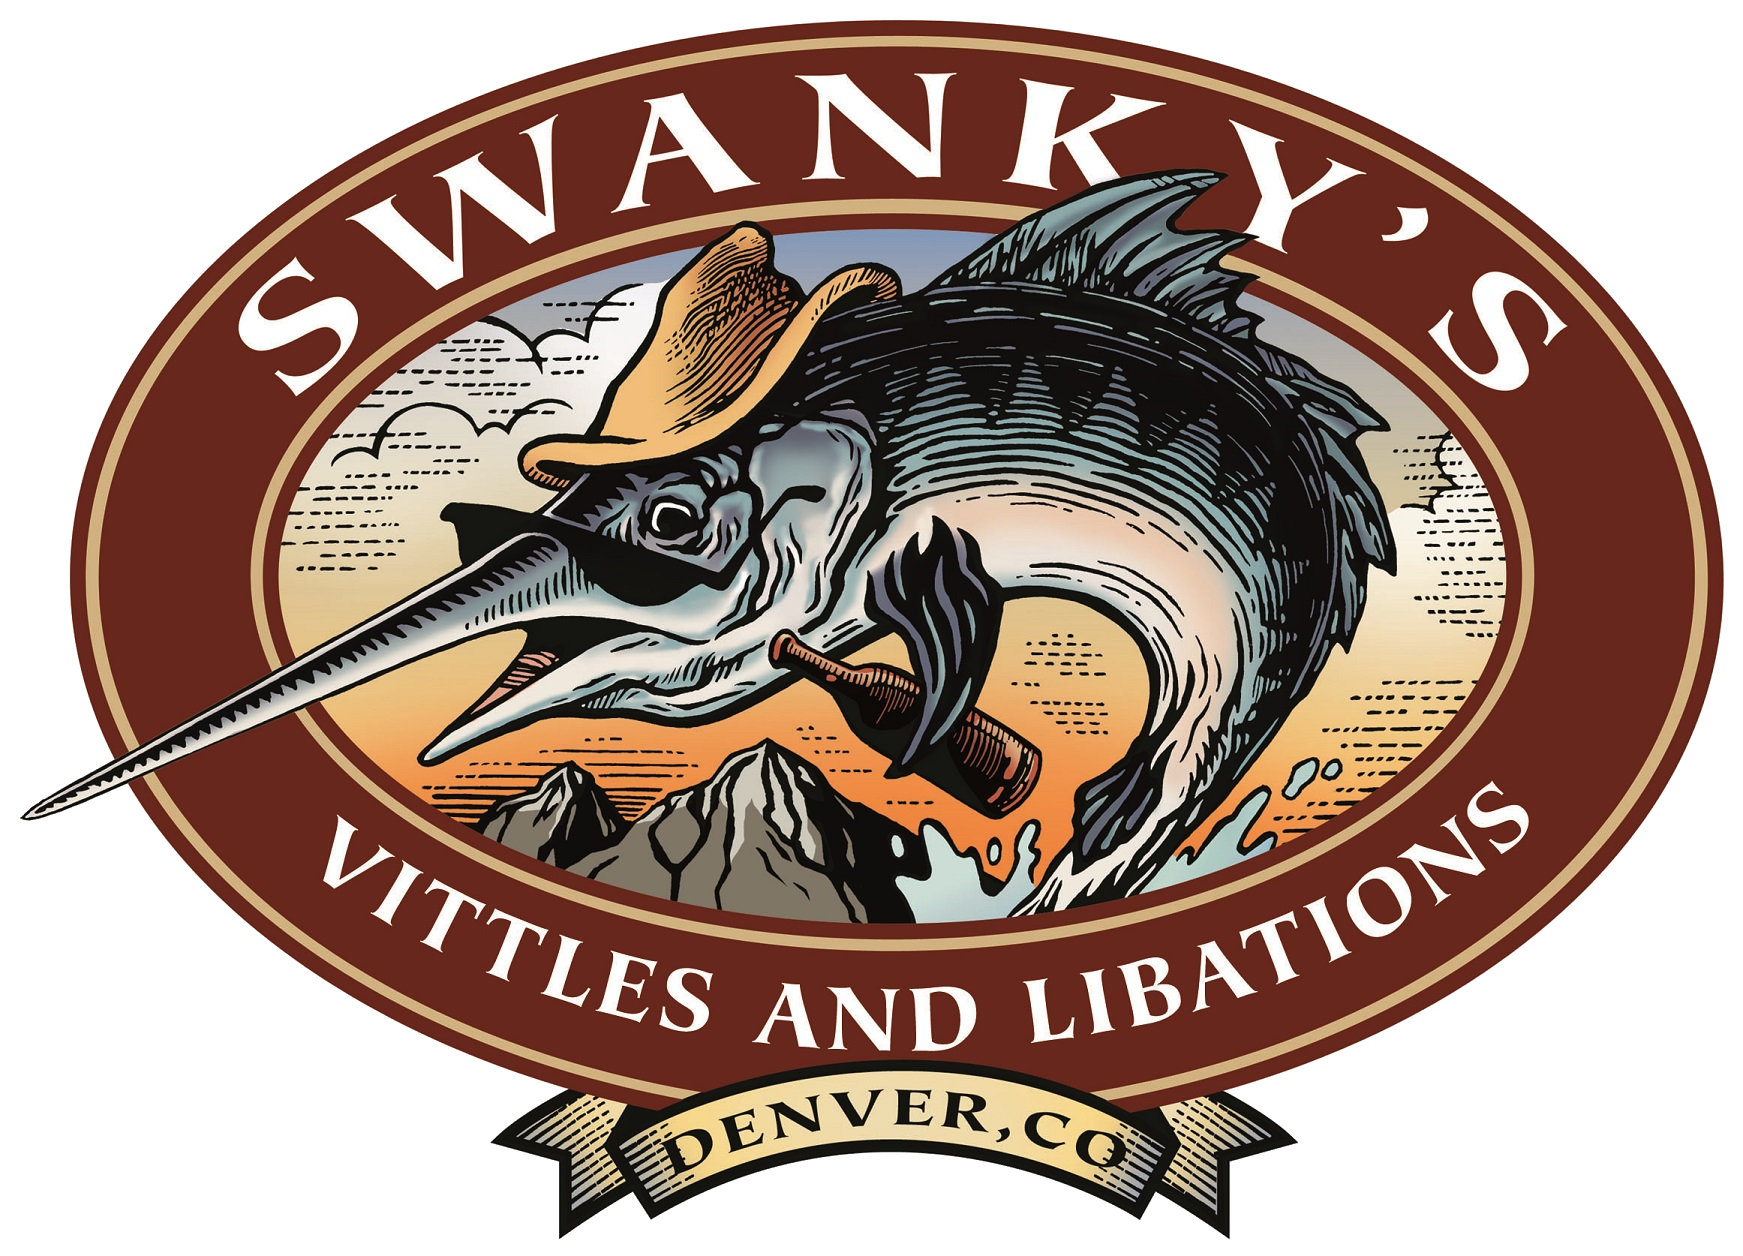 The logo for swanky 's vittles and libations in denver